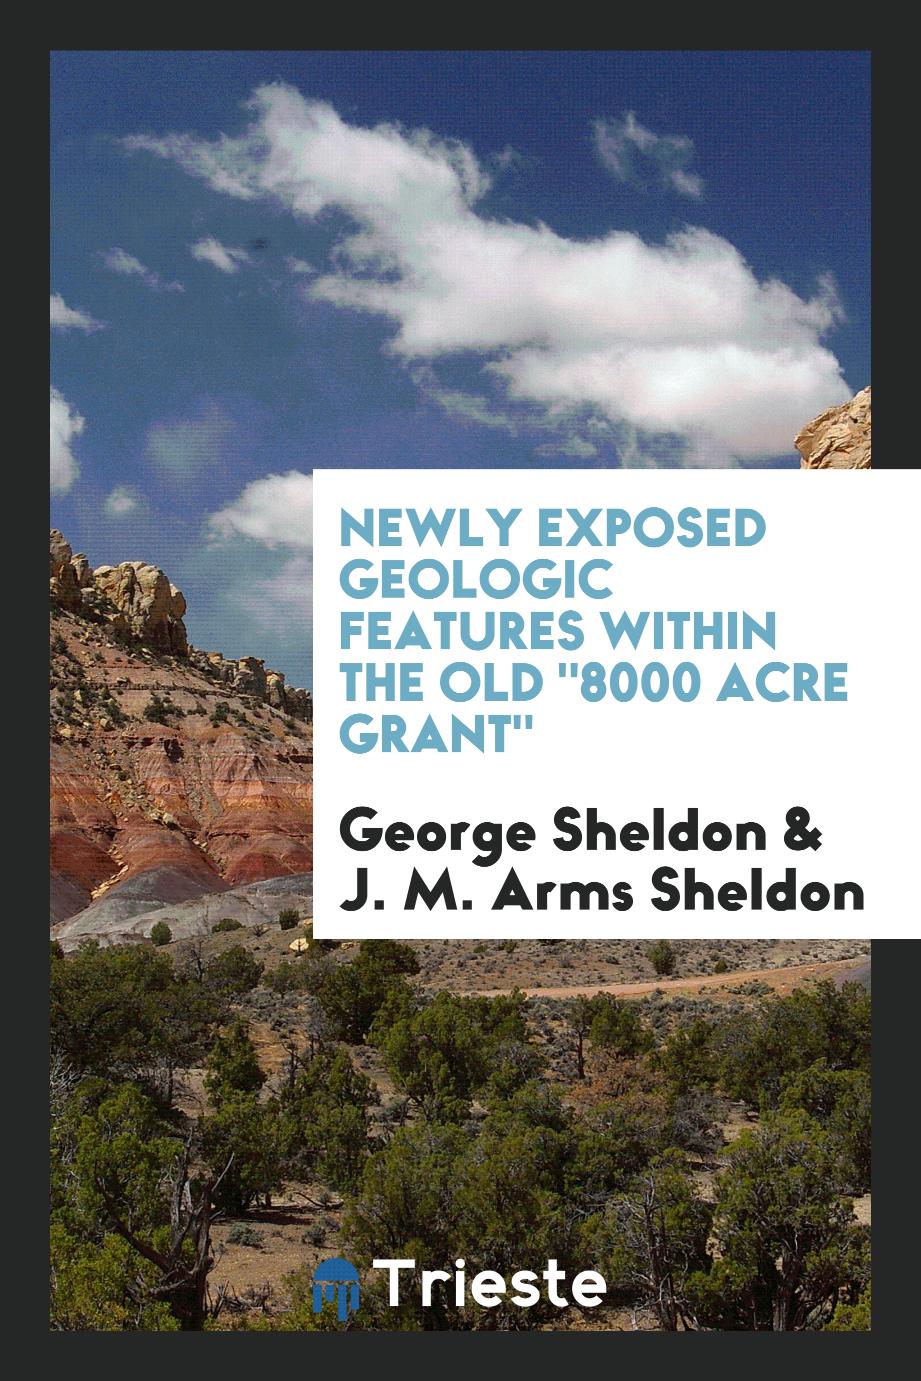 Newly exposed geologic features within the old "8000 acre grant"